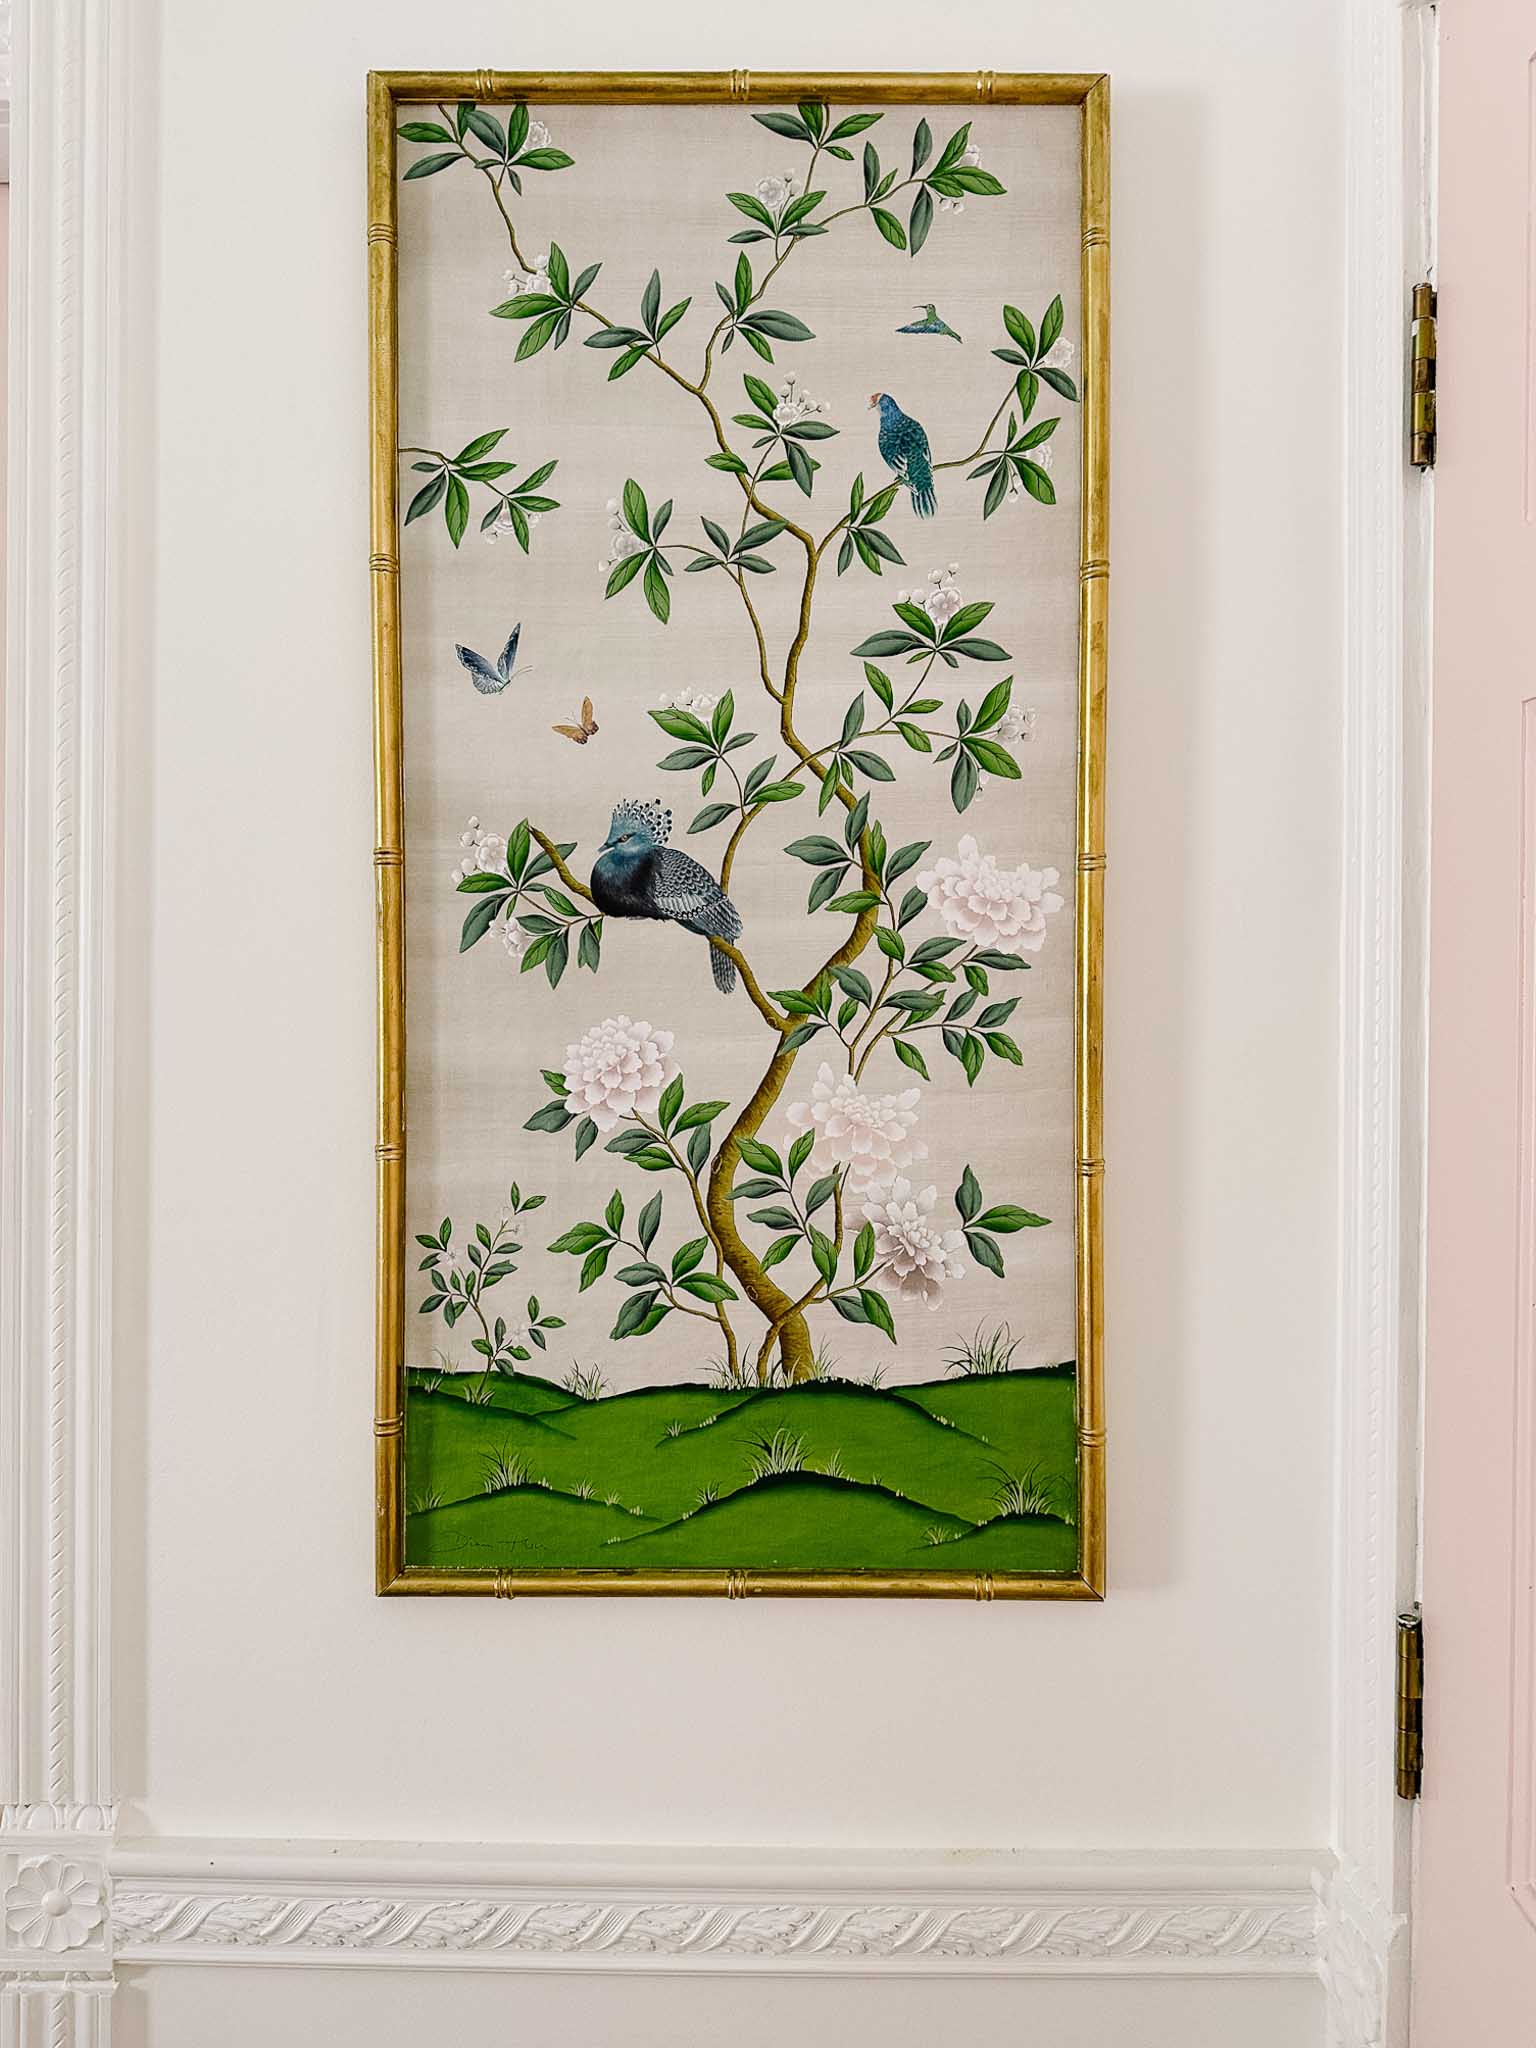 Diane Hill's 'Pearly Gates' chinoiserie panel in a DIY gold bamboo frame made by blogger 'At Home With Ashley'